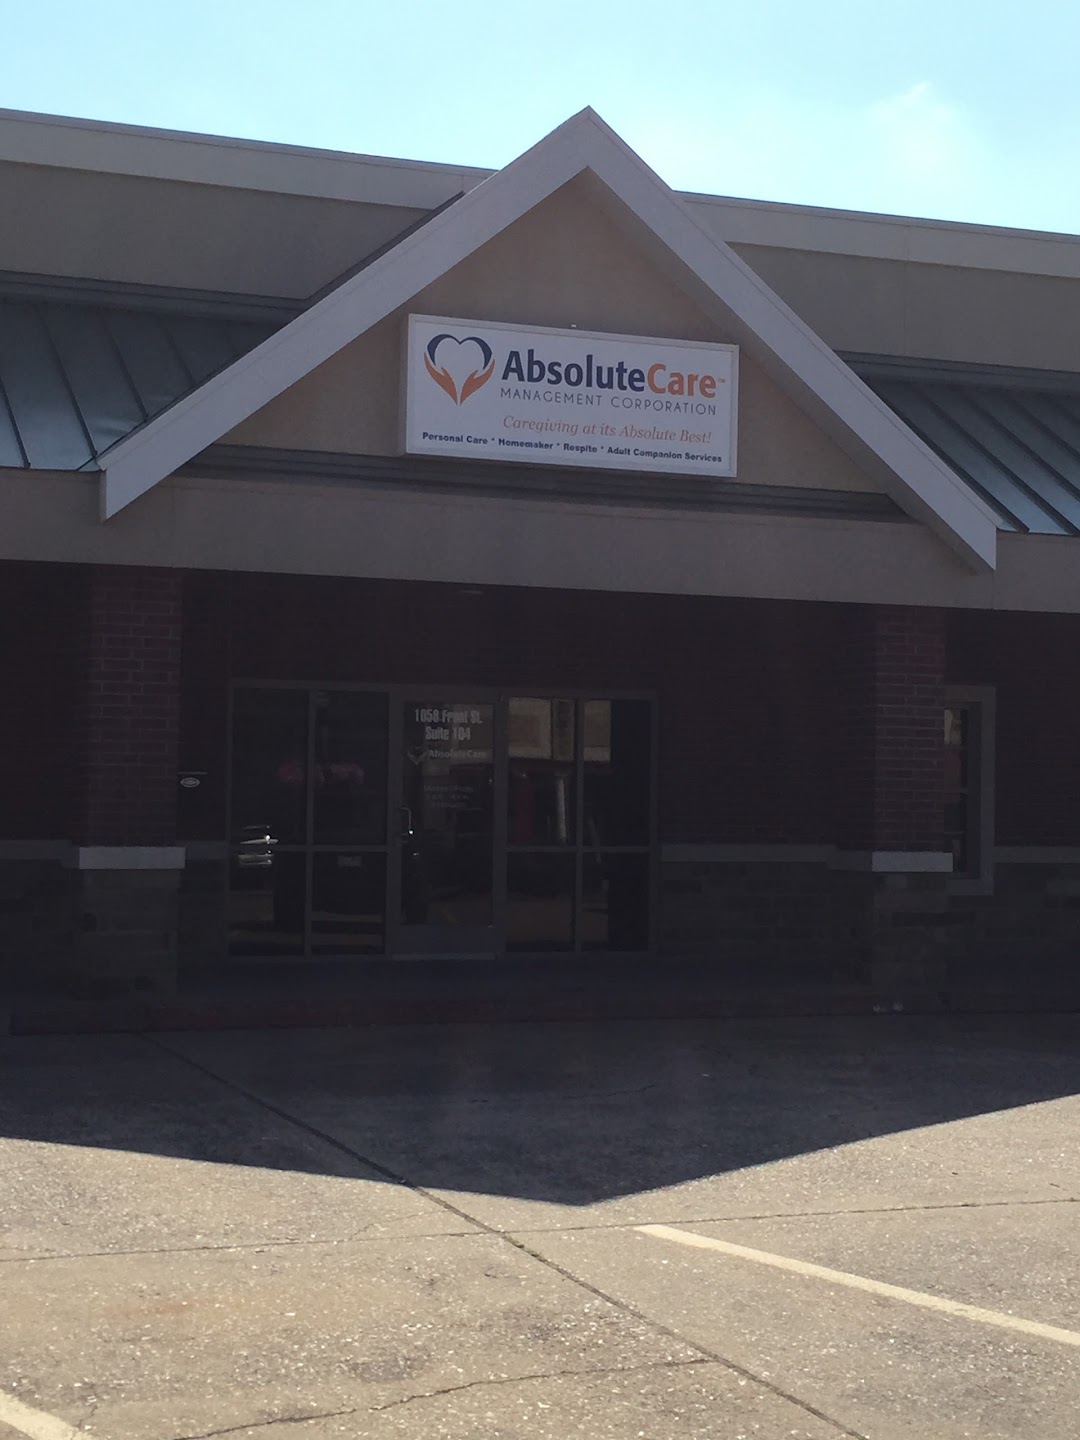 Absolute Care Management Corporation Resource Hub